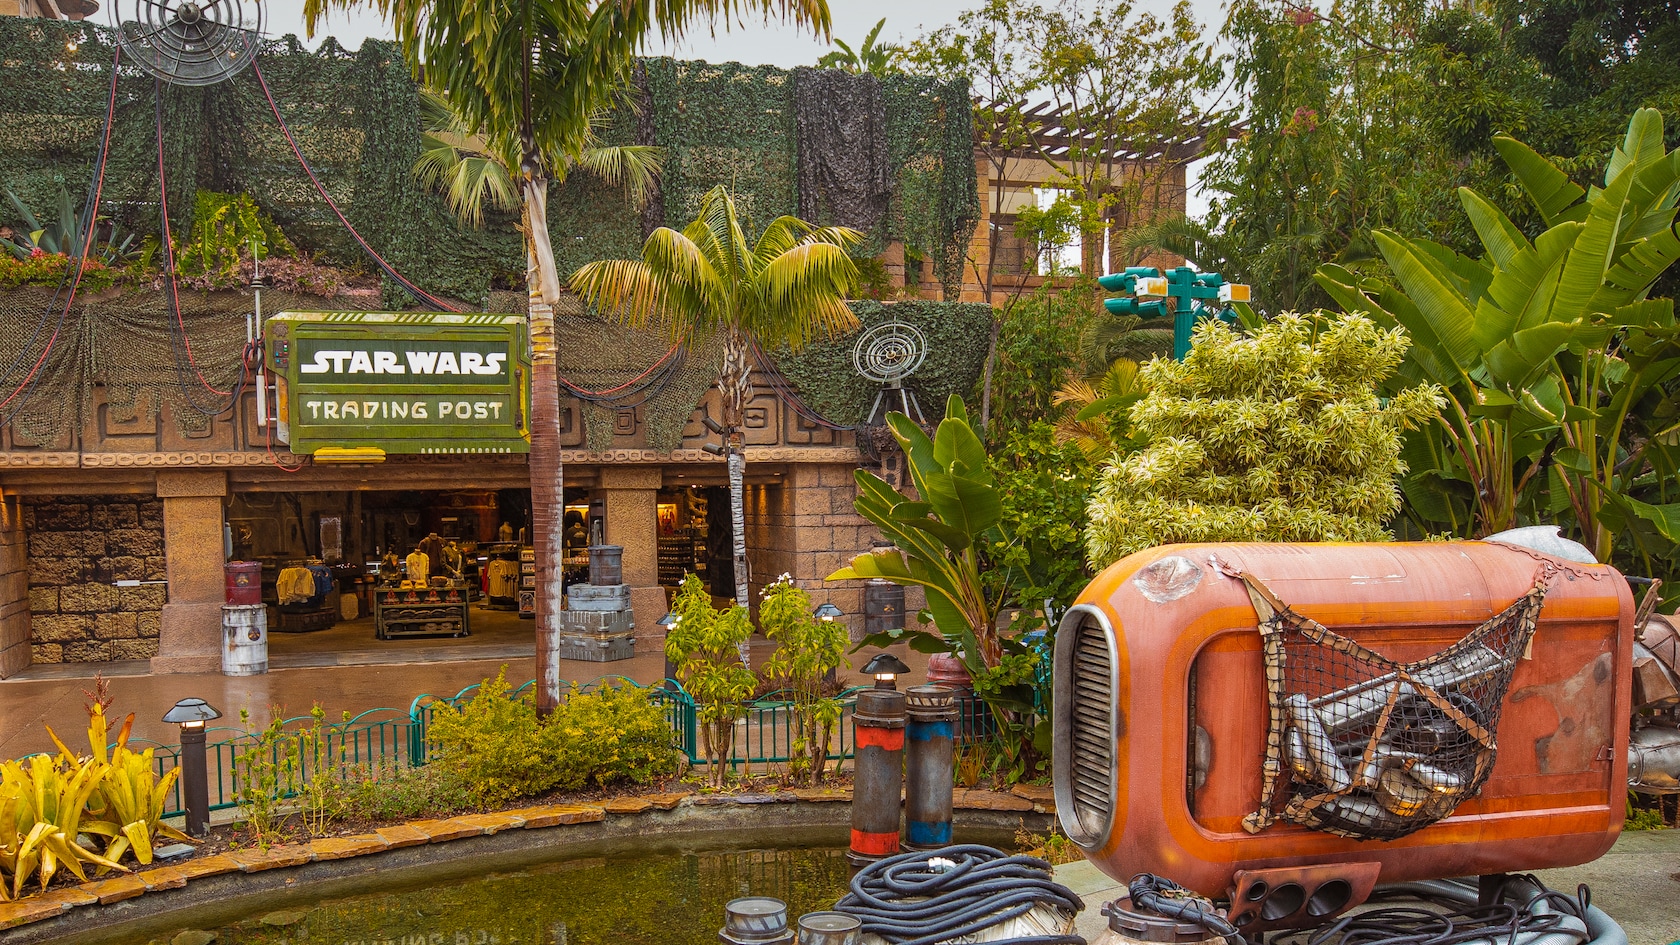 The store front of Star Wars Trading Post